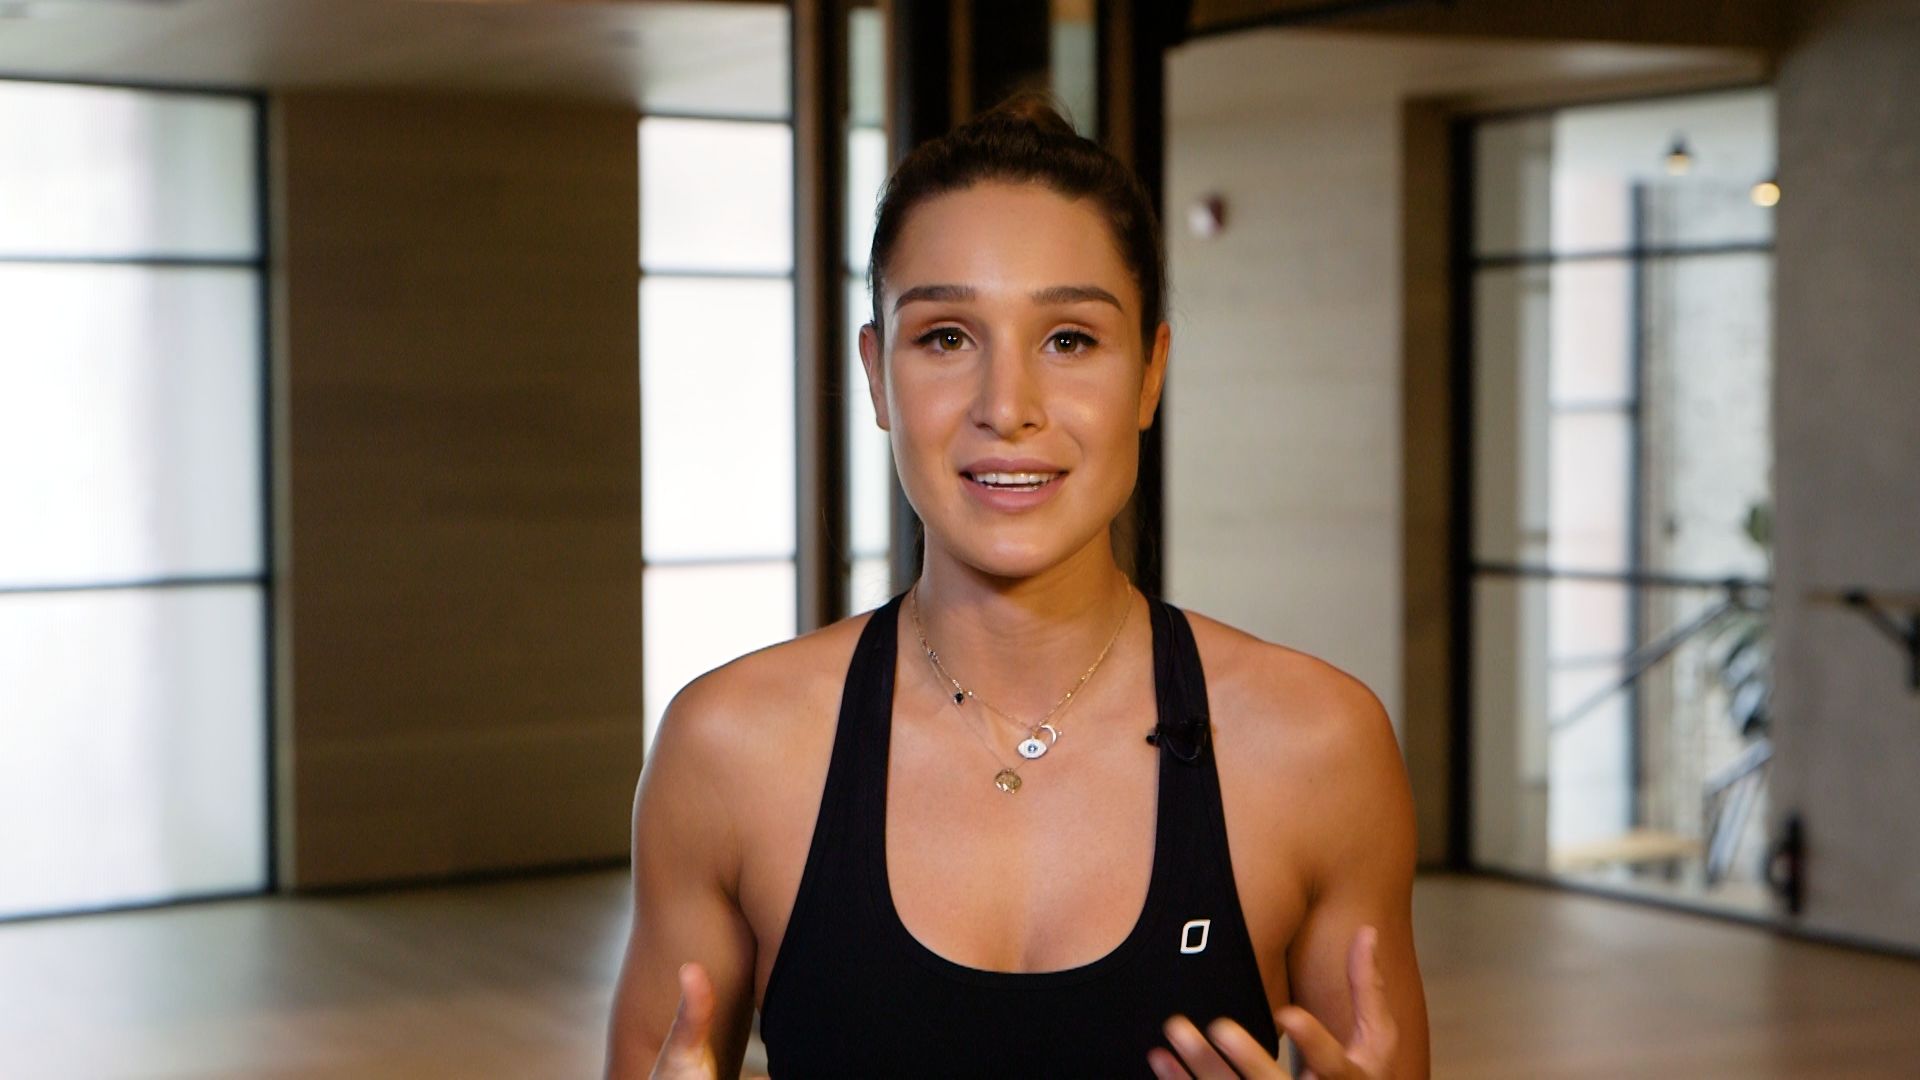 14 Minute Arm Workout At Home – Kayla Itsines